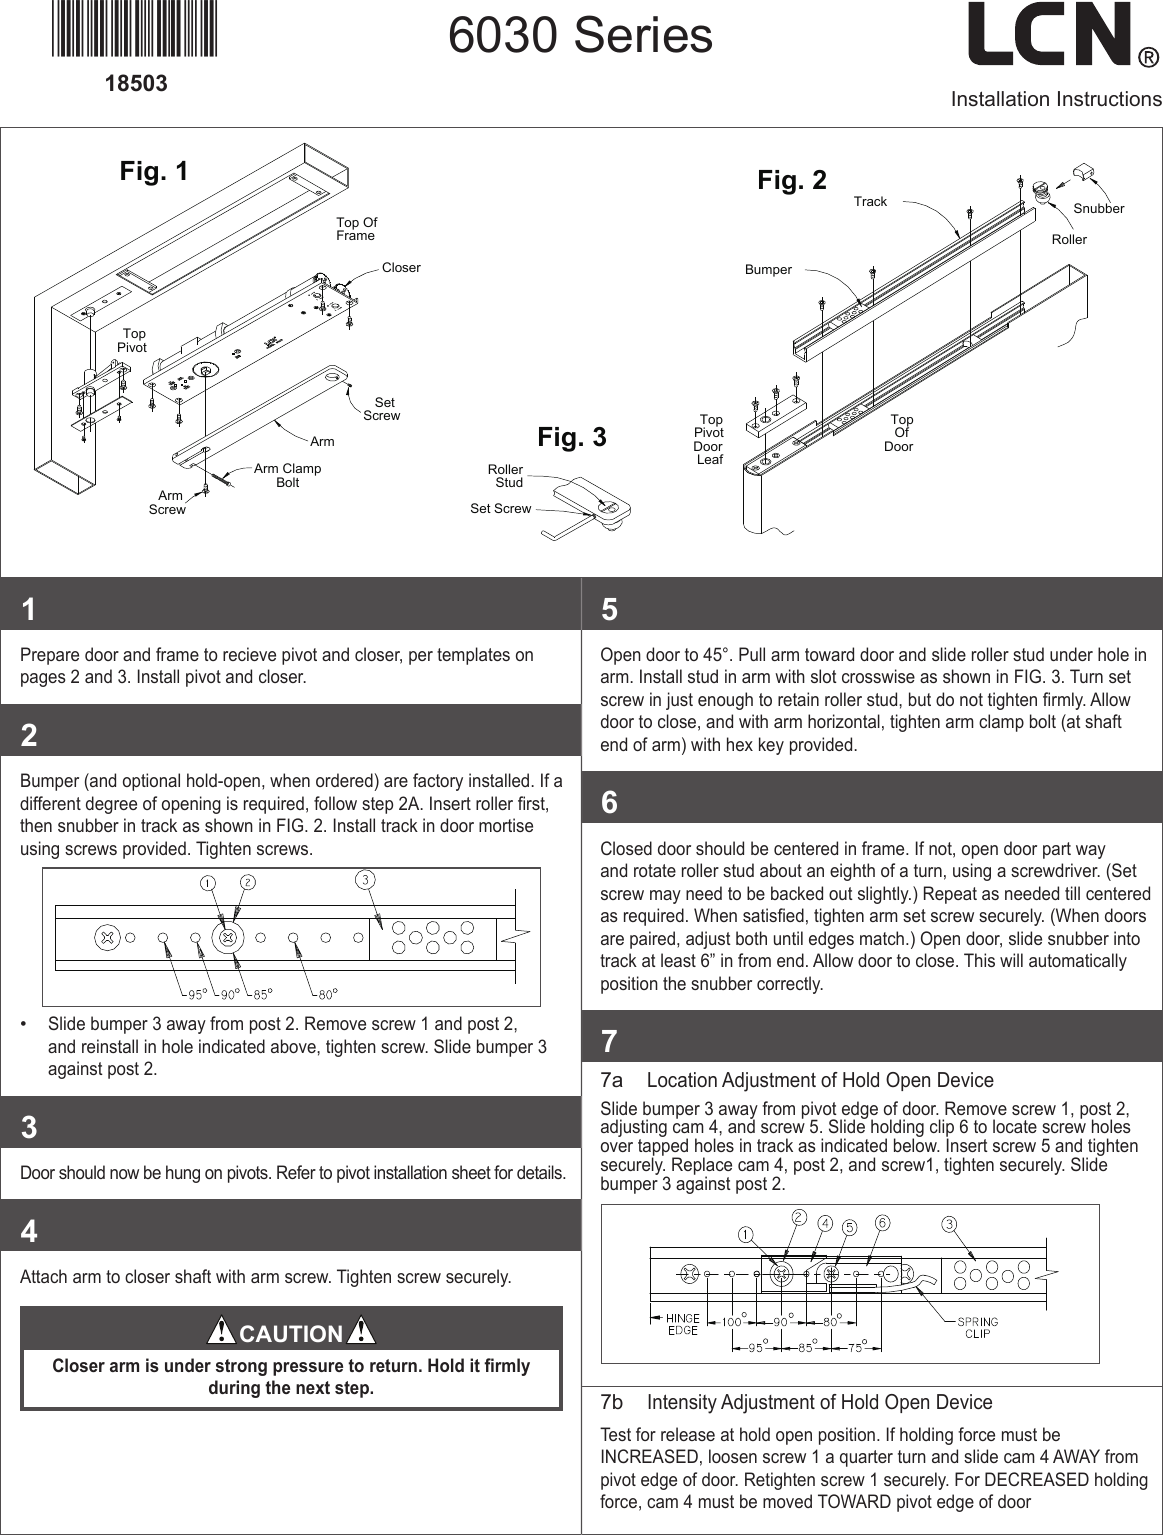 Page 1 of 5 - LCN  6030 Series Installation Guide LCN6030Installationguide